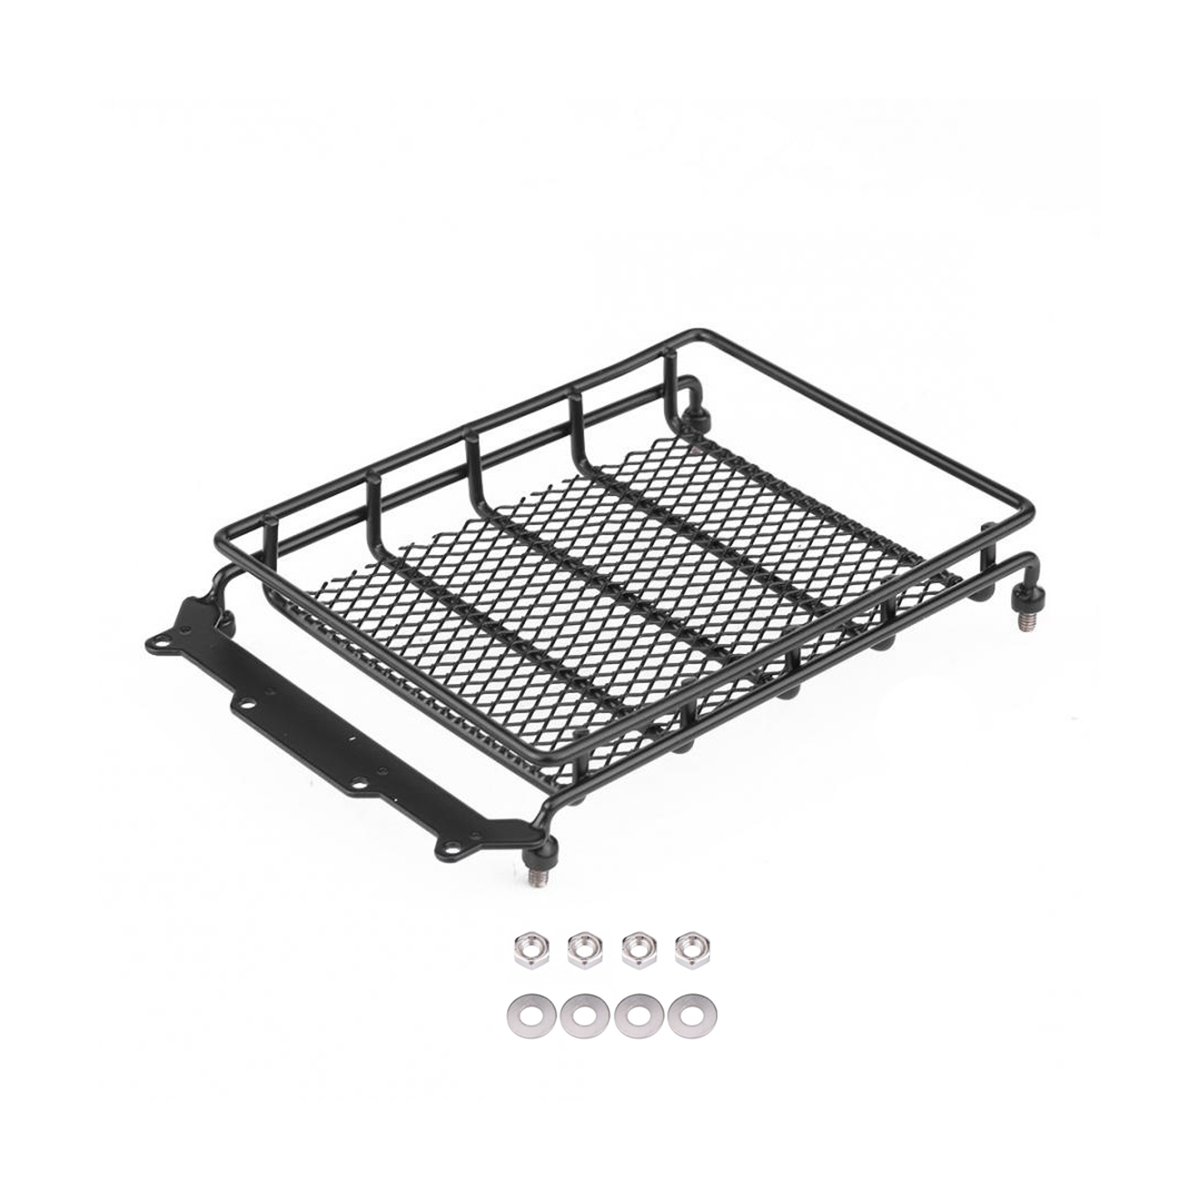 Metal 155X105mm Luggage Carrier Roof Rack for Axial SCX10 TRX4 D90 CC01 1